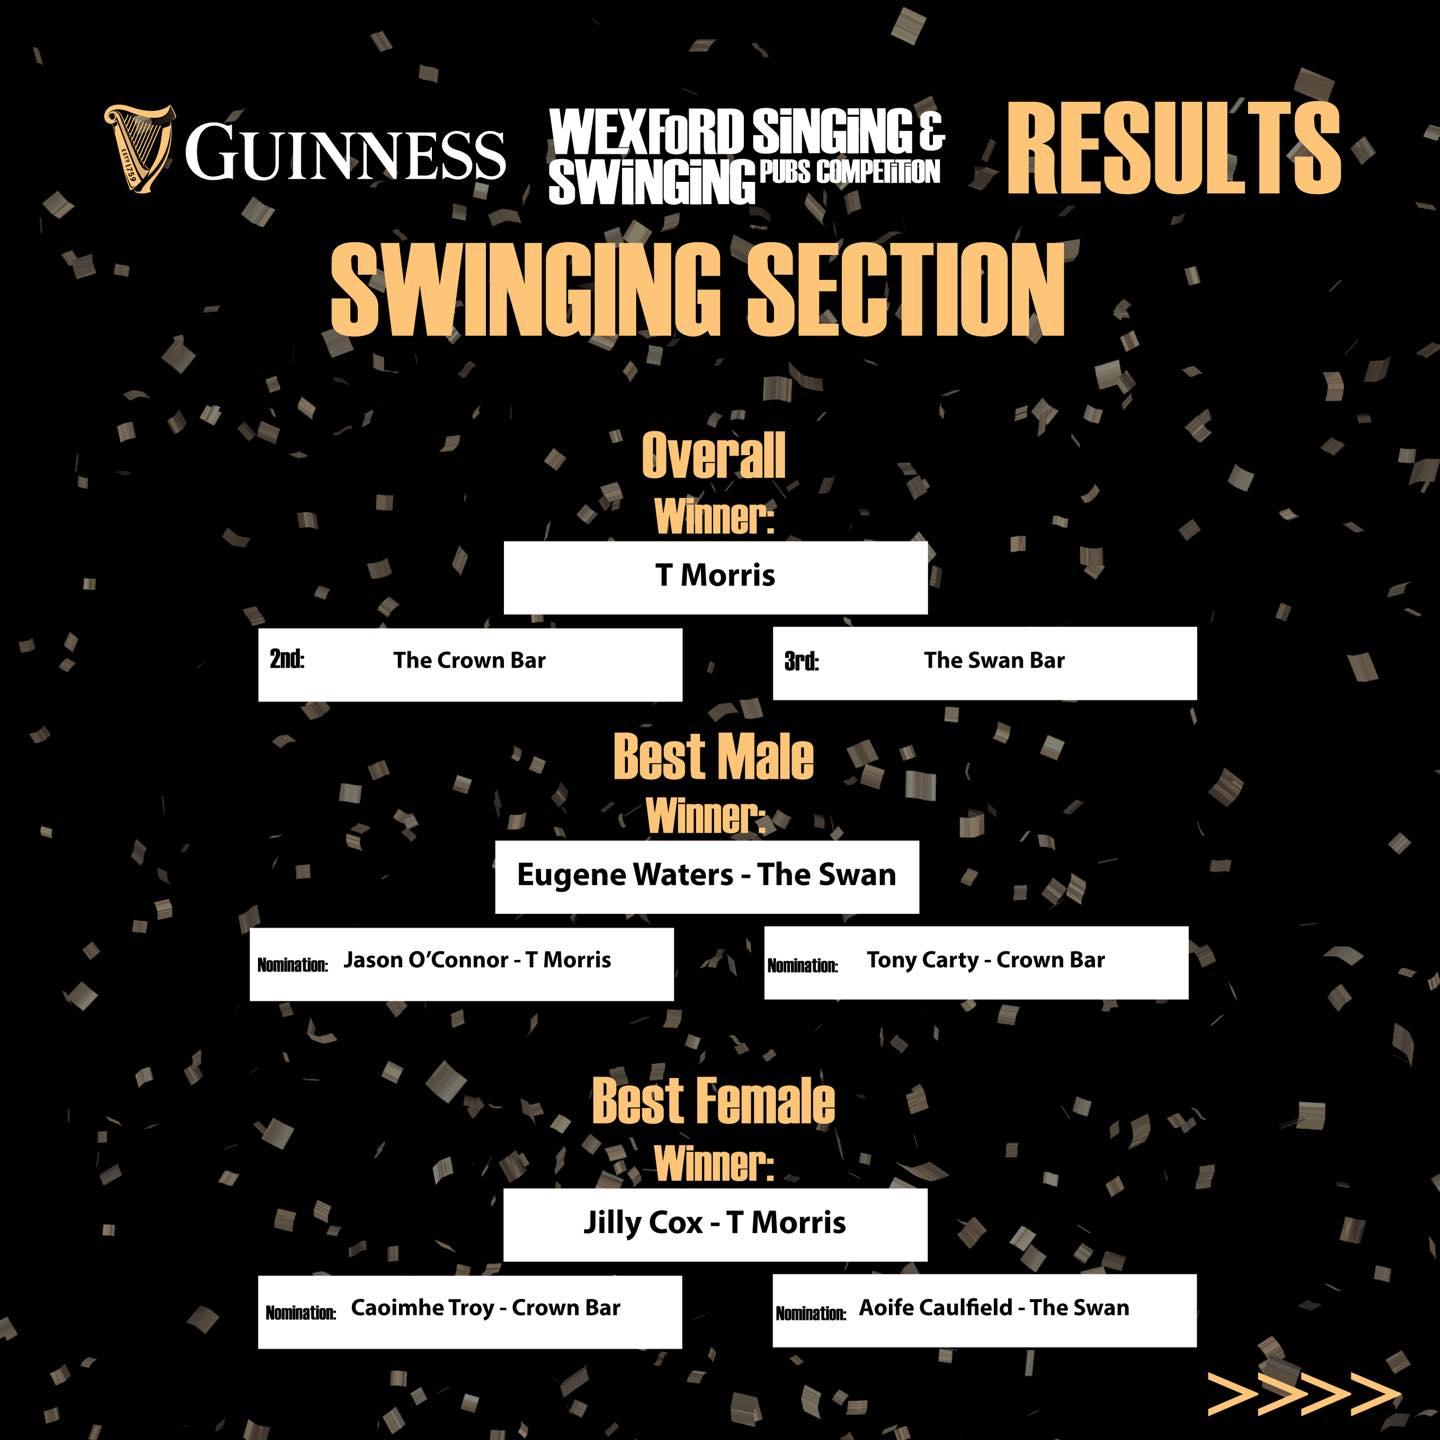 May be a graphic of text that says 'GUINNESS WEXFORD SiNGiNGE SWINGİNGP PUBS COMPETITION RESULTS SWINGING SECTION Overall Winner: T Morris The Crown Bar 3rd: The Swan Bar Best Male Winner: Eugene Waters The Swan Jason O'Connor Morris Nomination: Tony Carty Crown Bar Best Female Winner: Jilly Cox T Morris Nomination: Caoimhe Troy Crown Bar Nomination Aoife Caulfield The Swan >>>>'”>



<p>Source of photo: <a href=